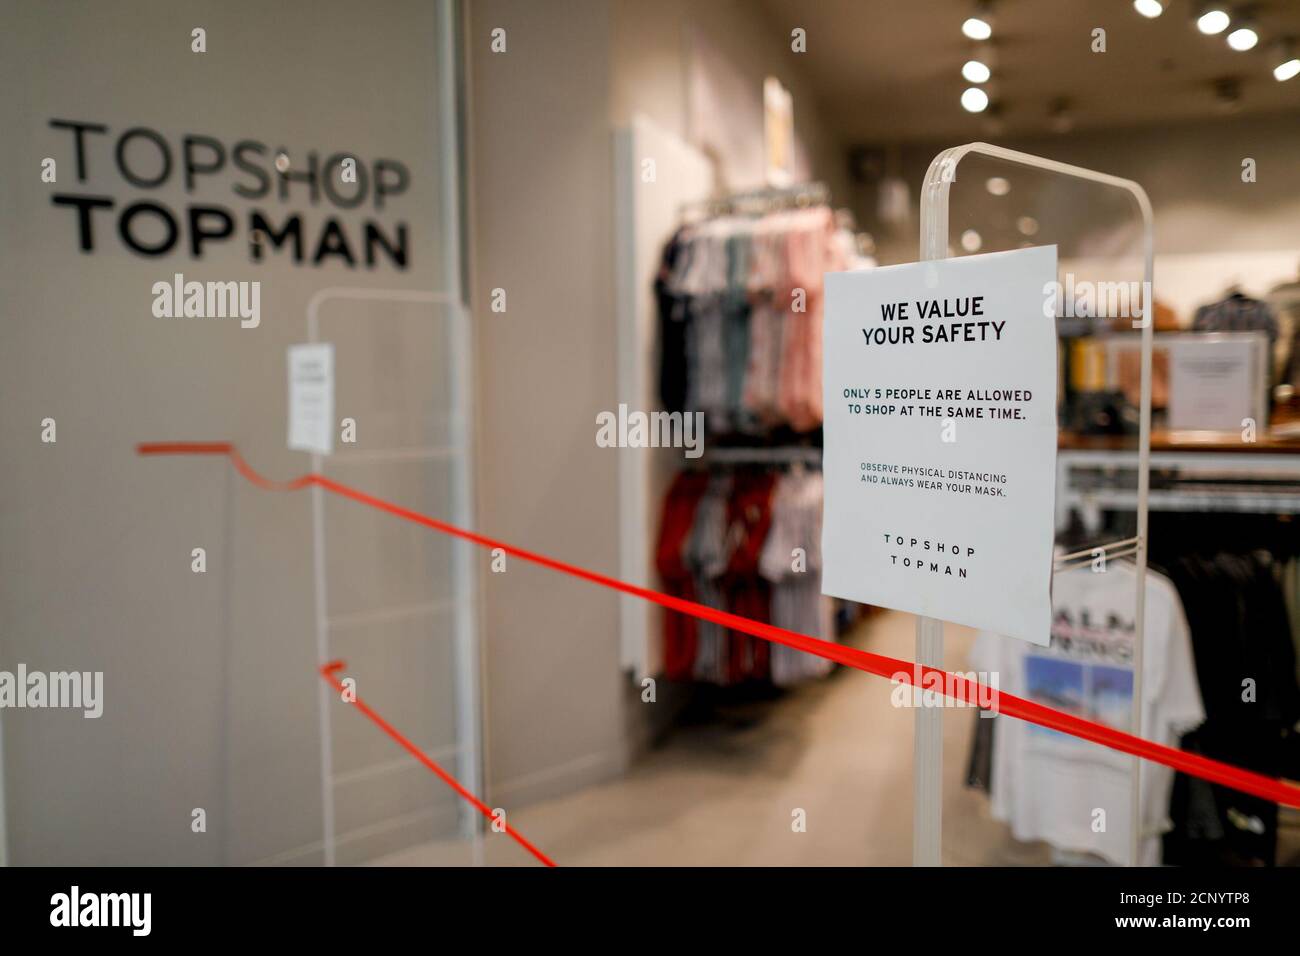 A reminder of safety precautions is posted outside a branch of UK clothing  brand TOPSHOP inside the SM Mall of Asia, amid the coronavirus disease  (COVID-19) outbreak, in Pasay City, Metro Manila,